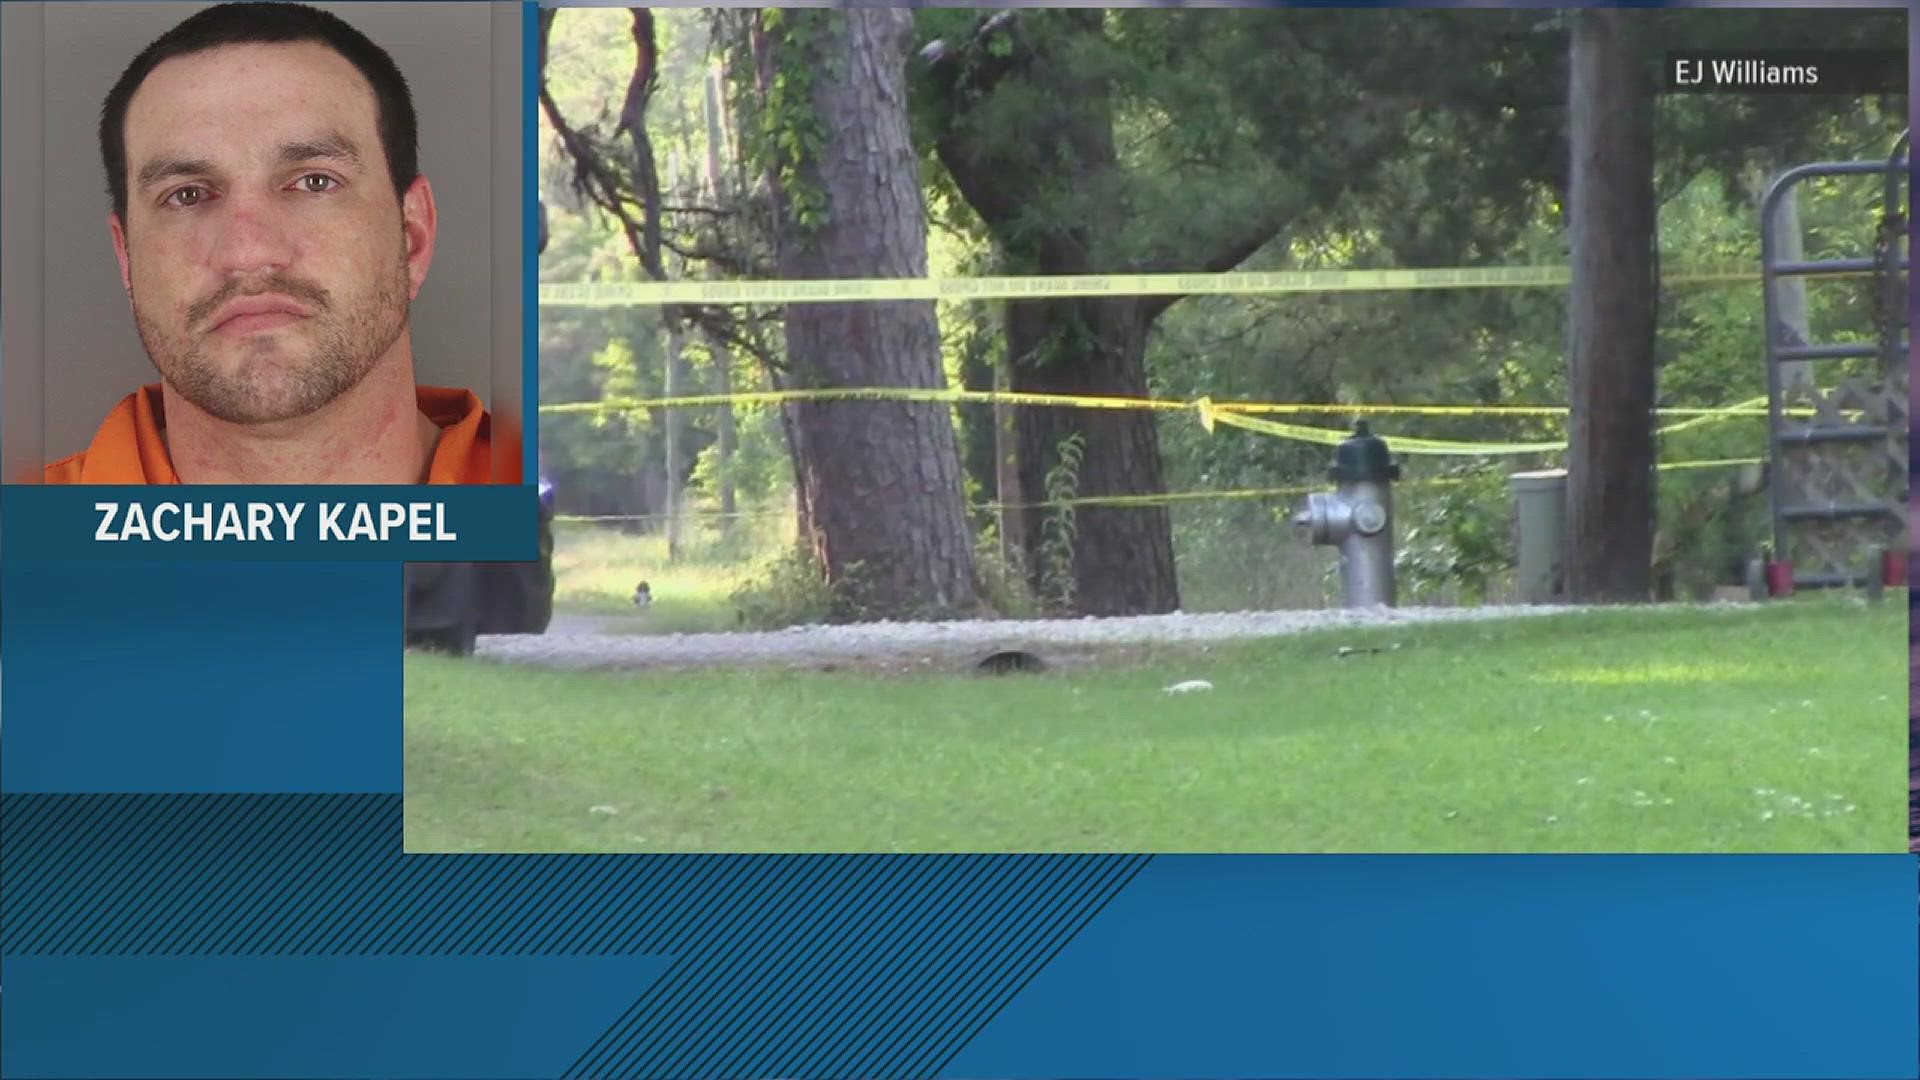 Zachary Kapel was found guilty of murder in connection with the April 2020 fatal shooting of Shane Russell Jones, 41, of Beaumont.